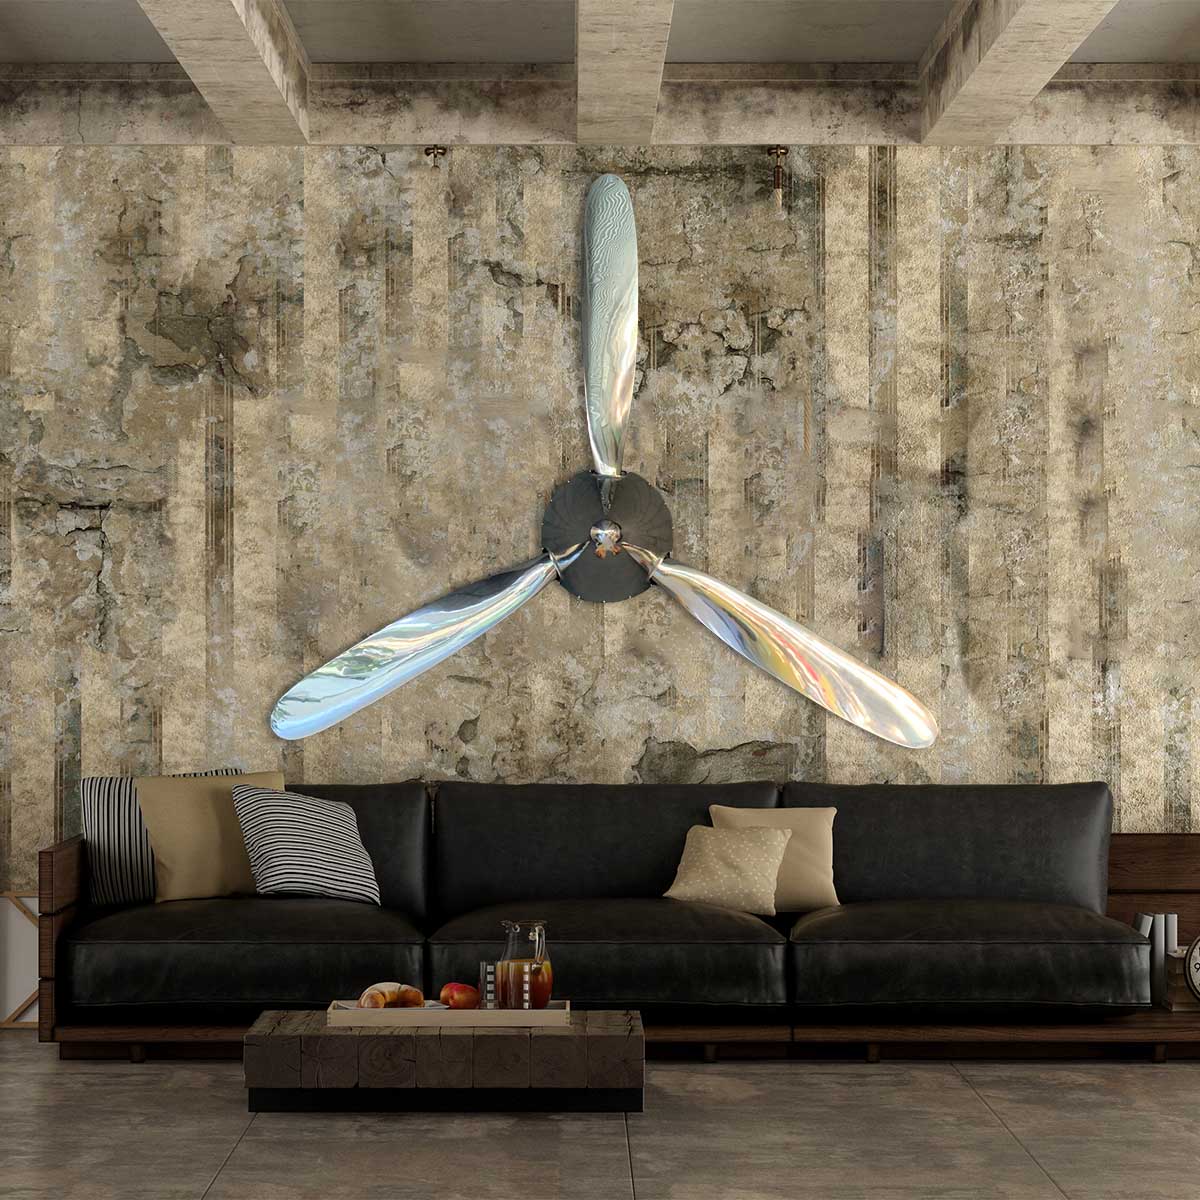 Polished three-bladed Hartzell propeller with spinner mounted on a wall in a grunge living room.